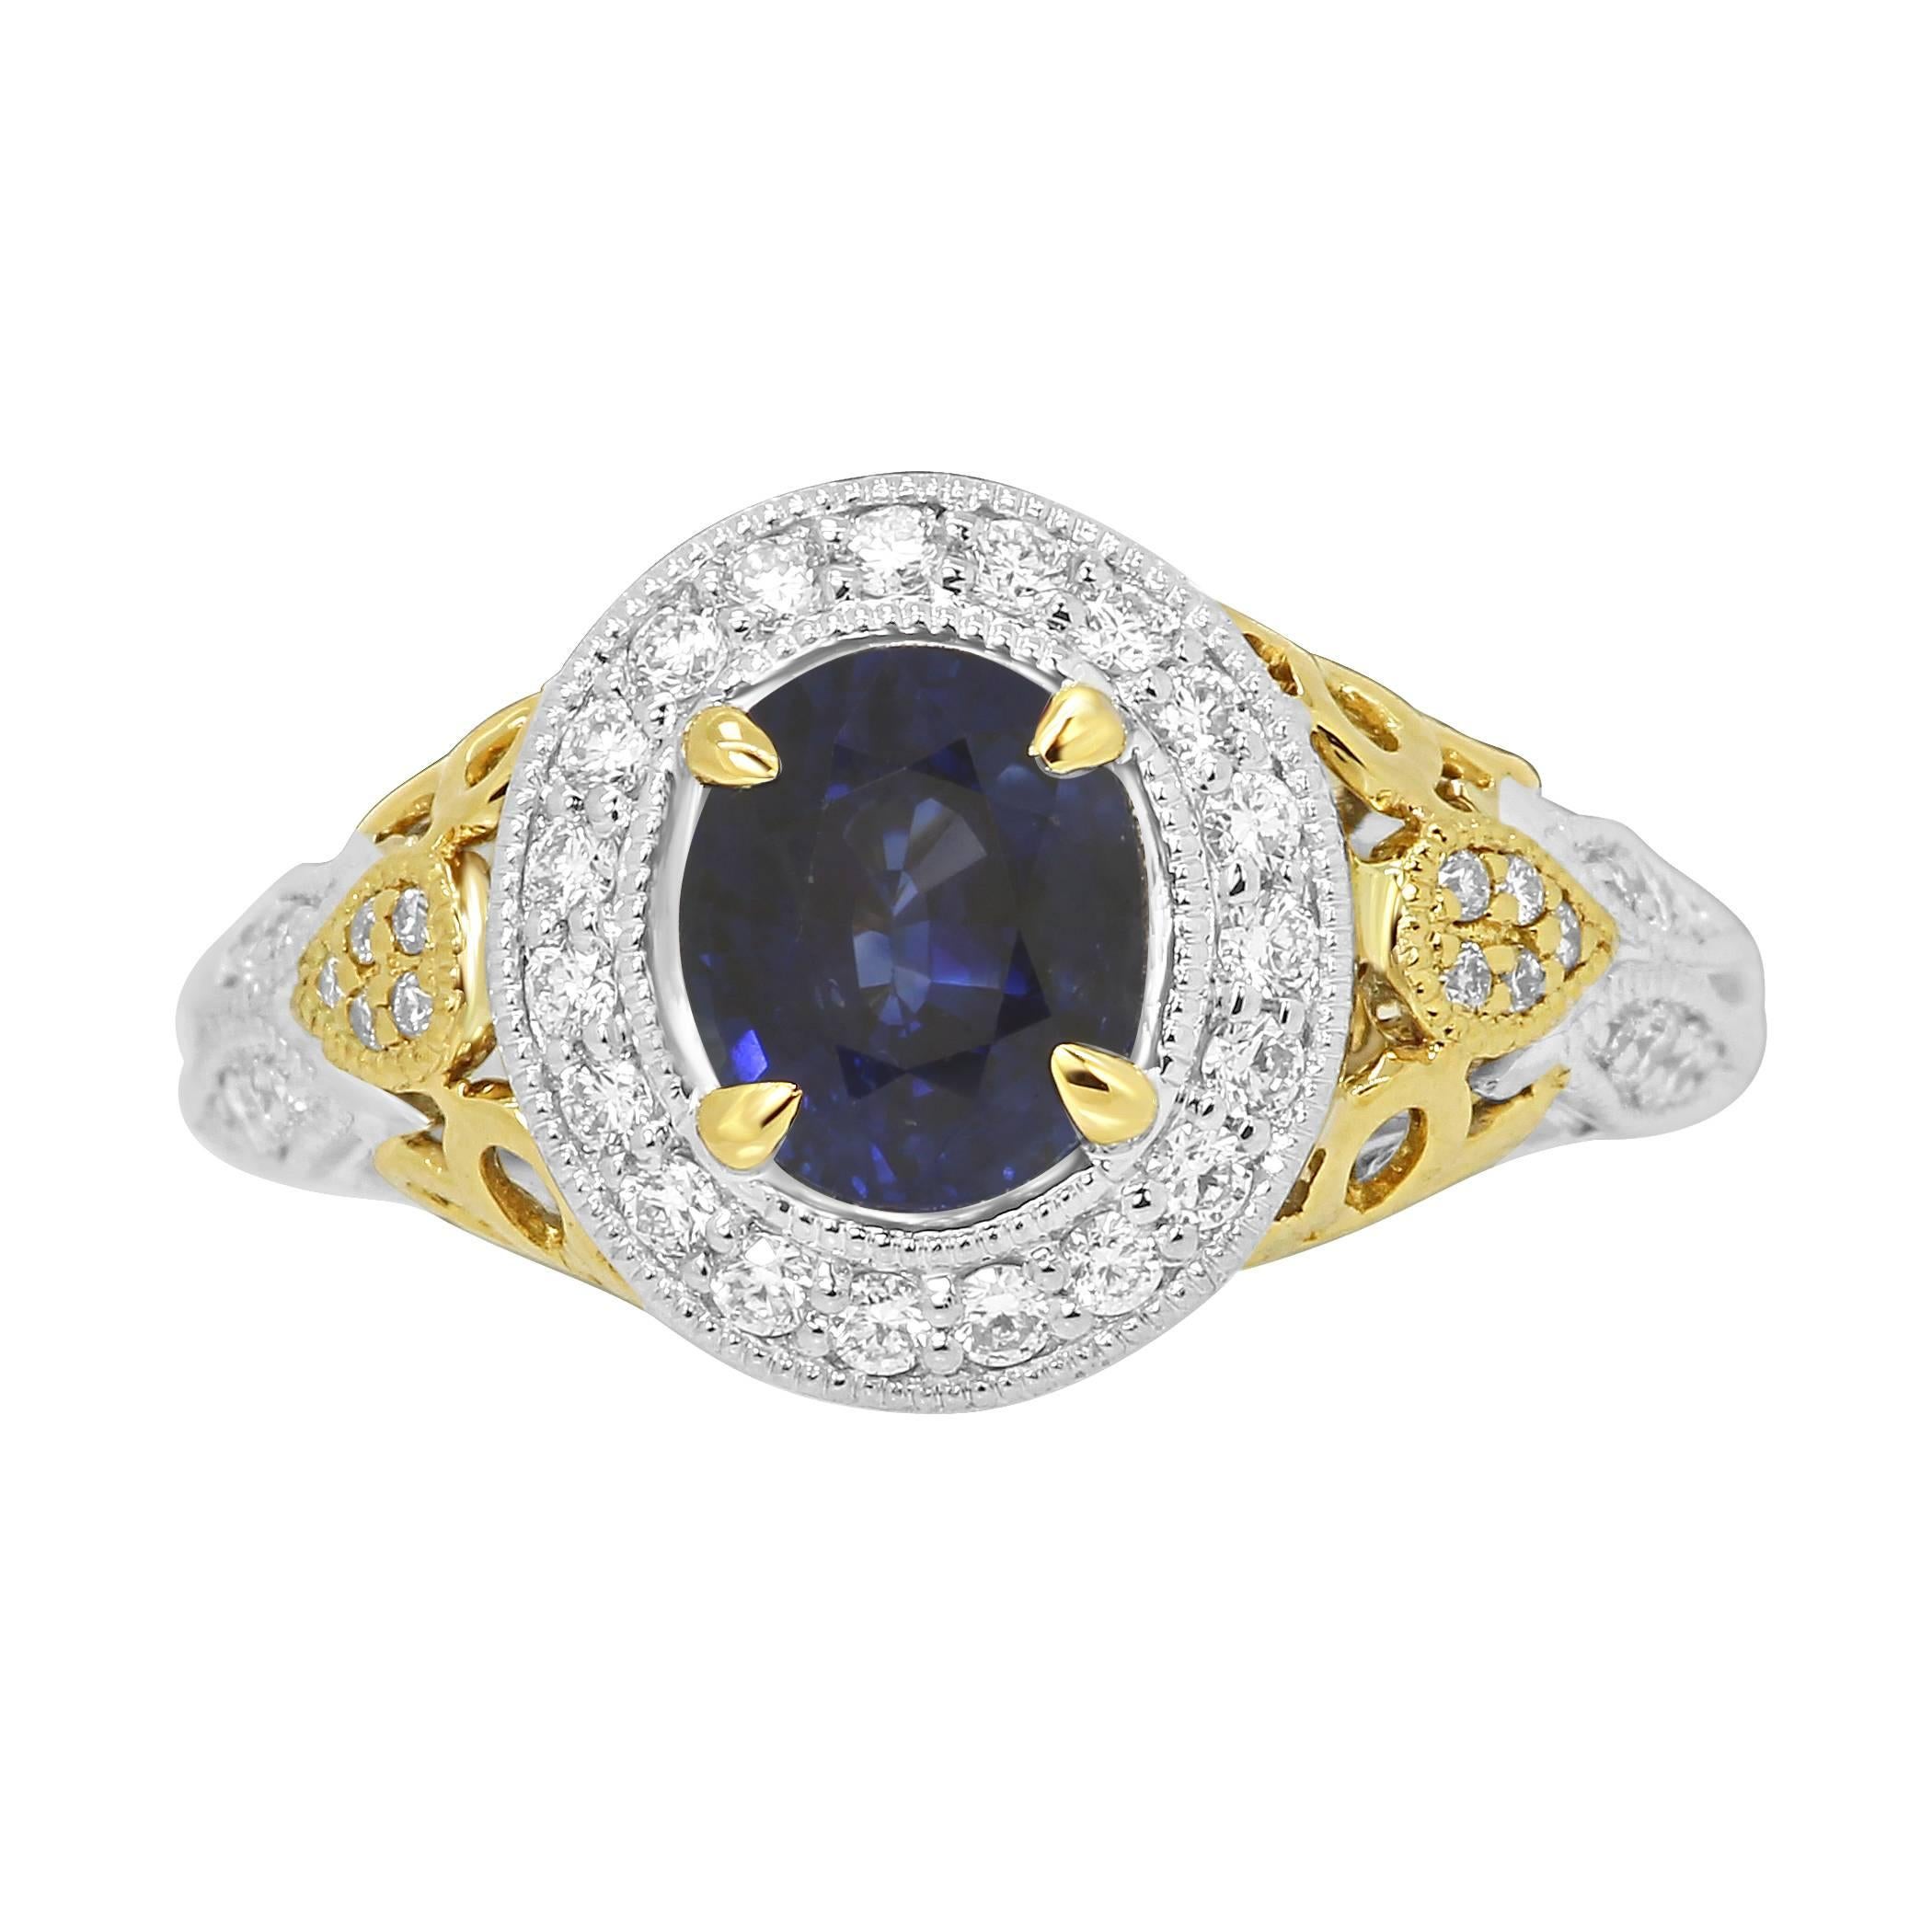 Stunning Heated Blue Sapphire Oval 1.43 Carat encircled in a single Halo of White Round Diamonds 0.37 Carat in 14K White and Yellow Gold.

Total Stone Weight 1.80 Carat